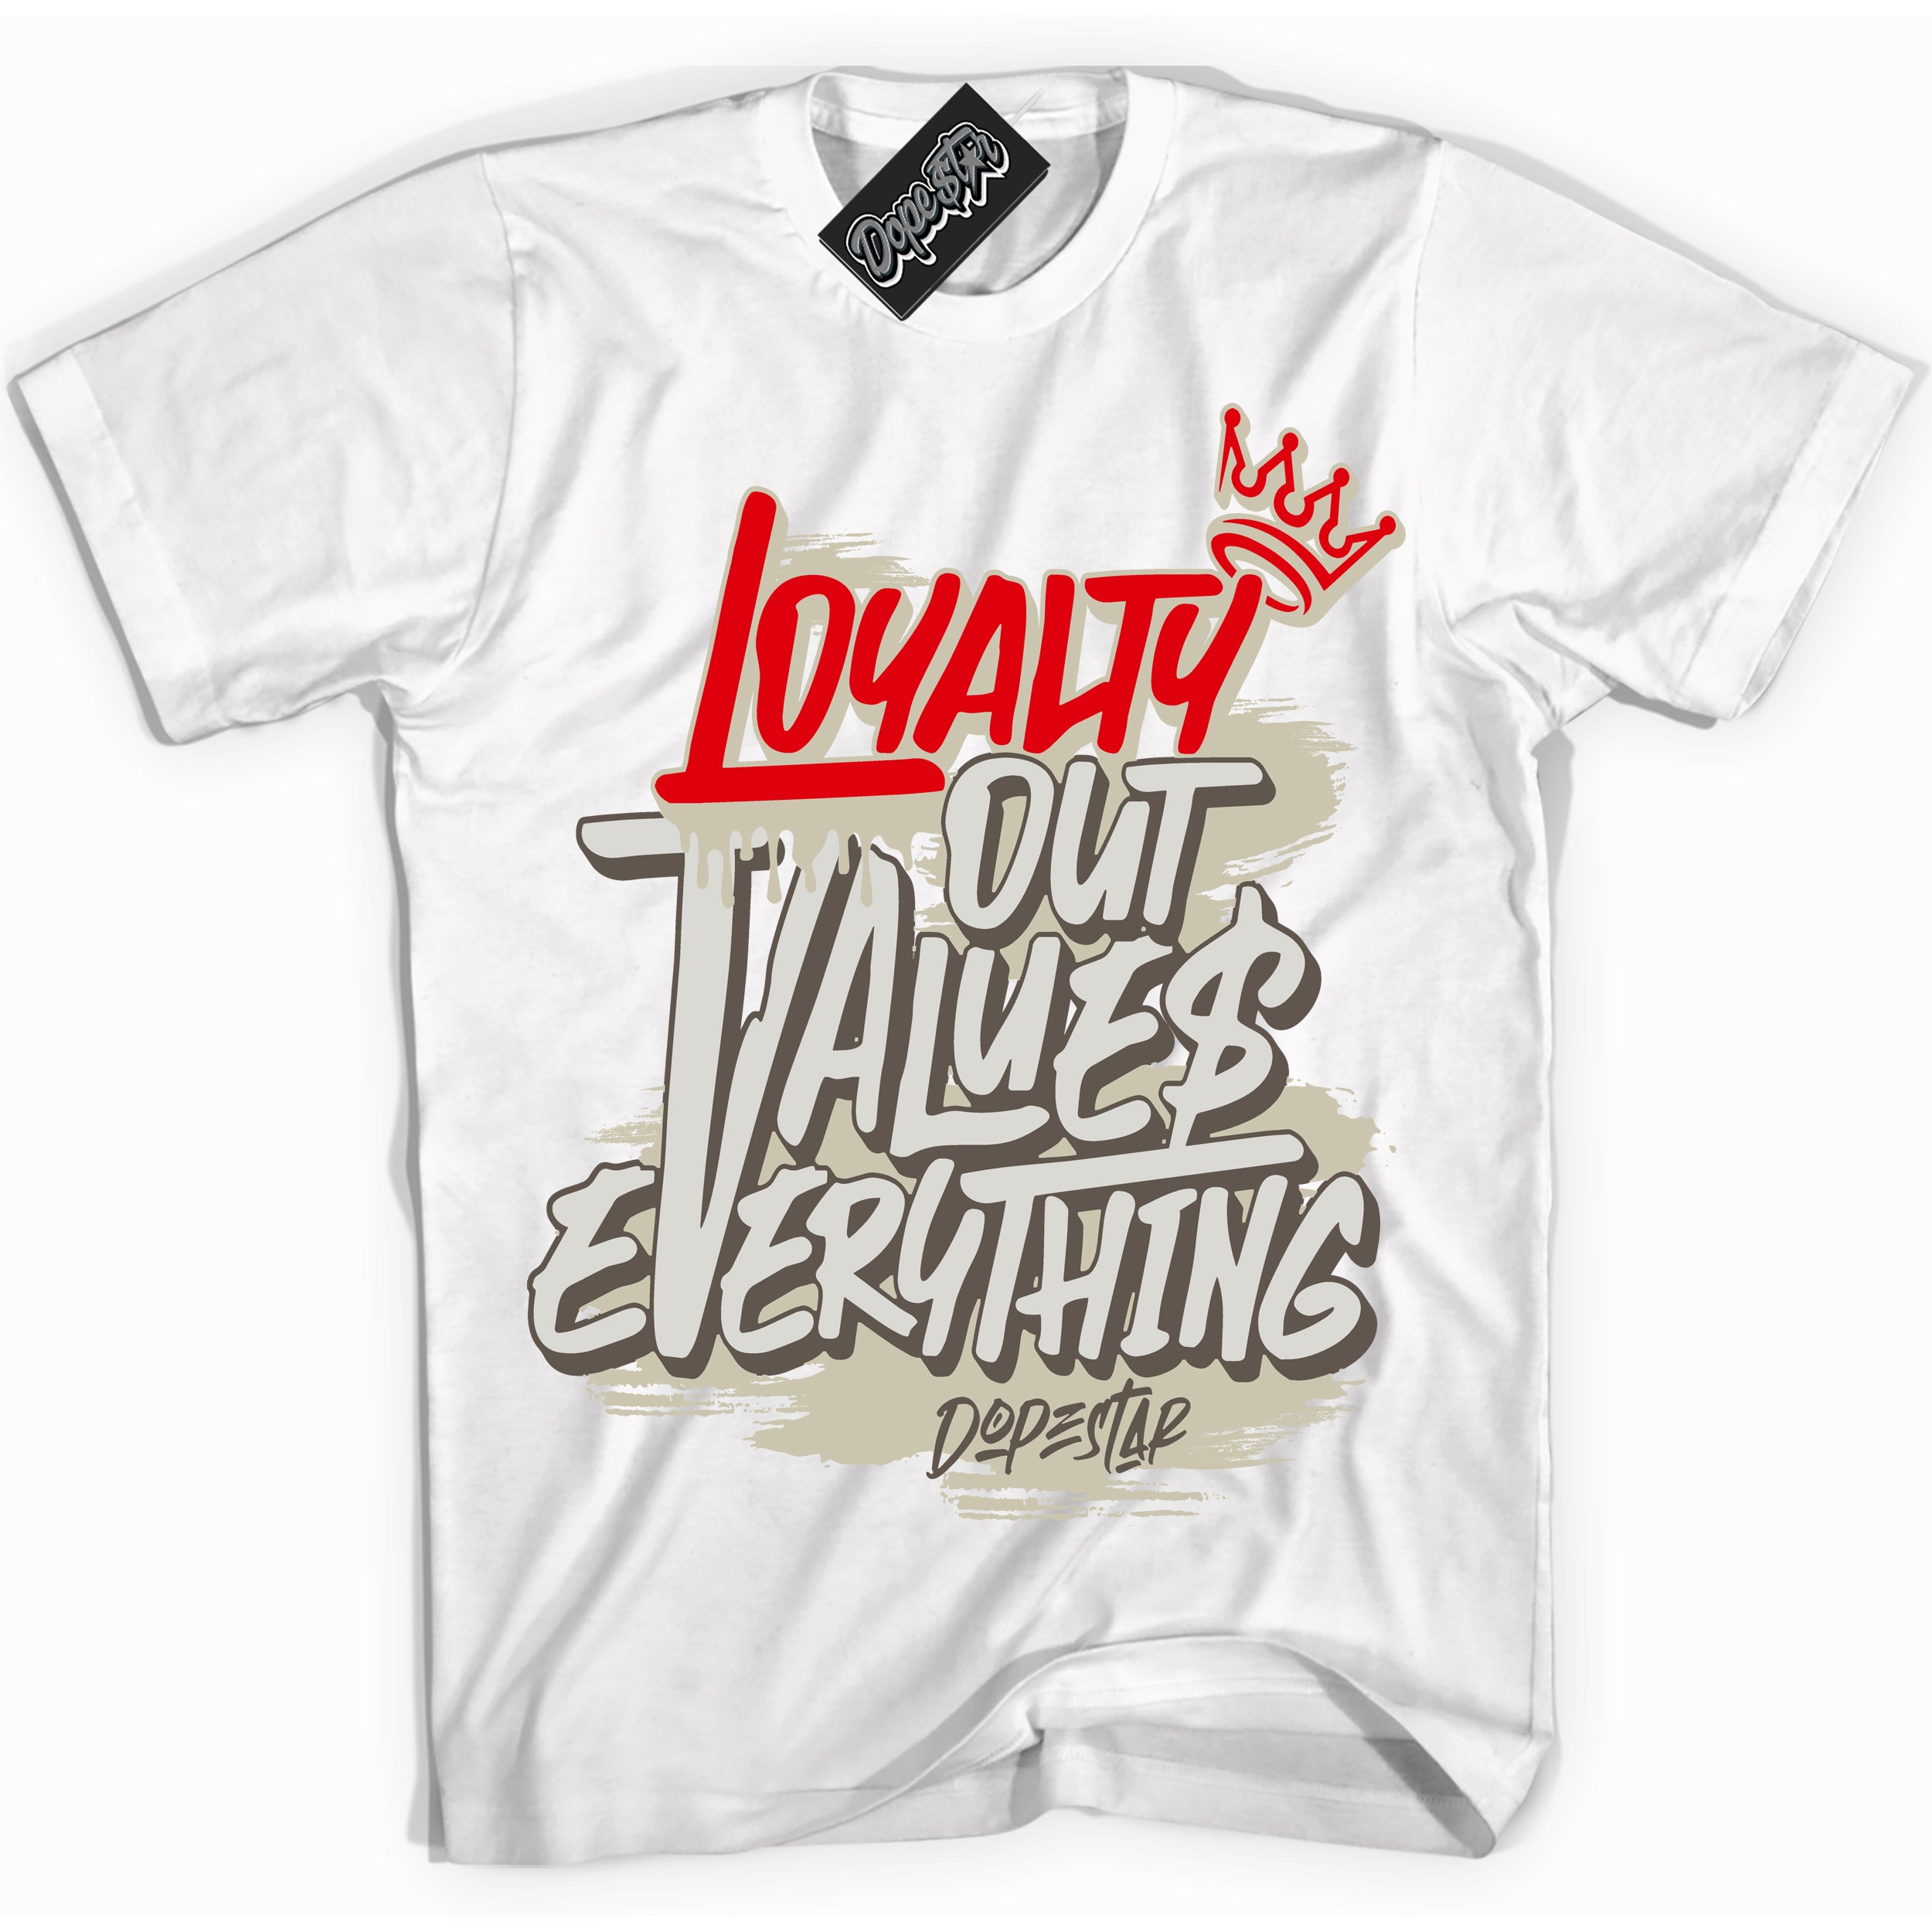 Cool White Shirt with “ Loyalty Out Values Everything” design that perfectly matches Travis Scott Reverse Mocha 1s Sneakers.